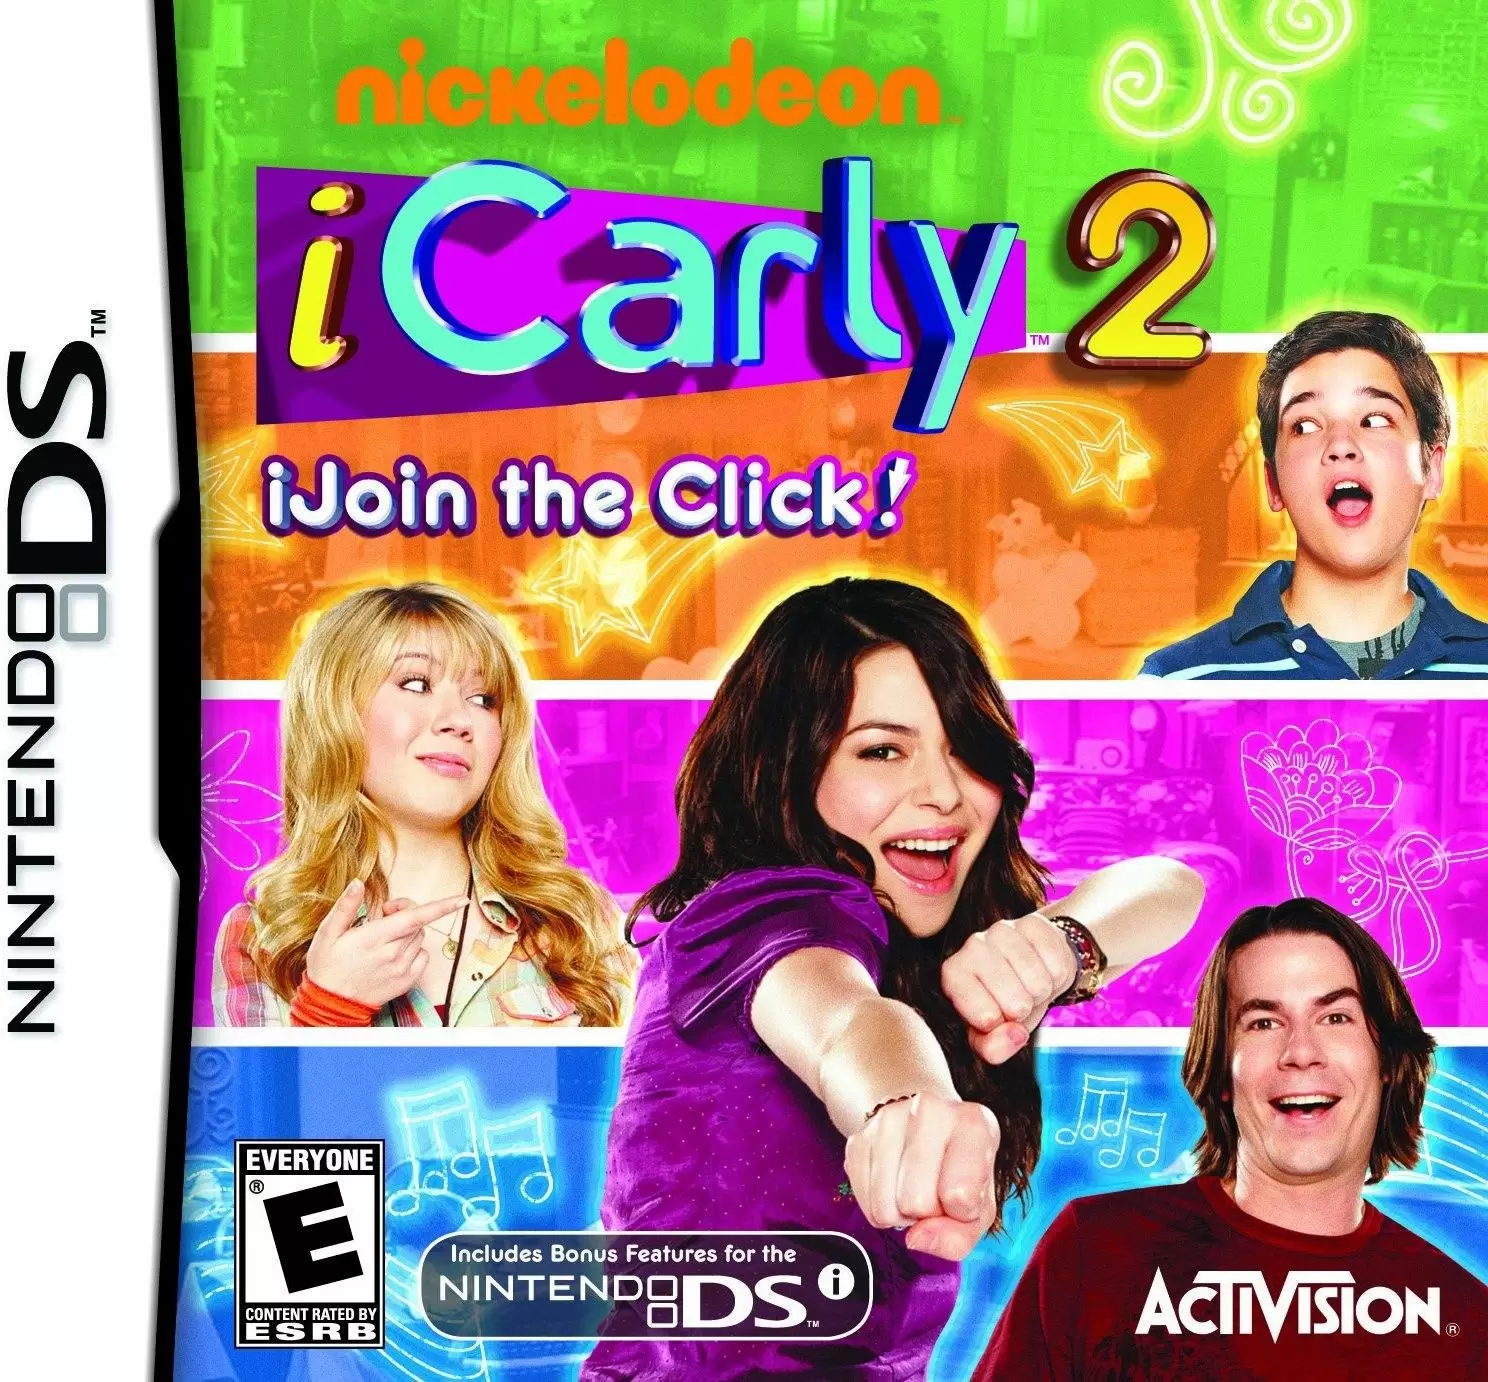 Nintendo DS Games - iCarly 2: iJoin the Click!